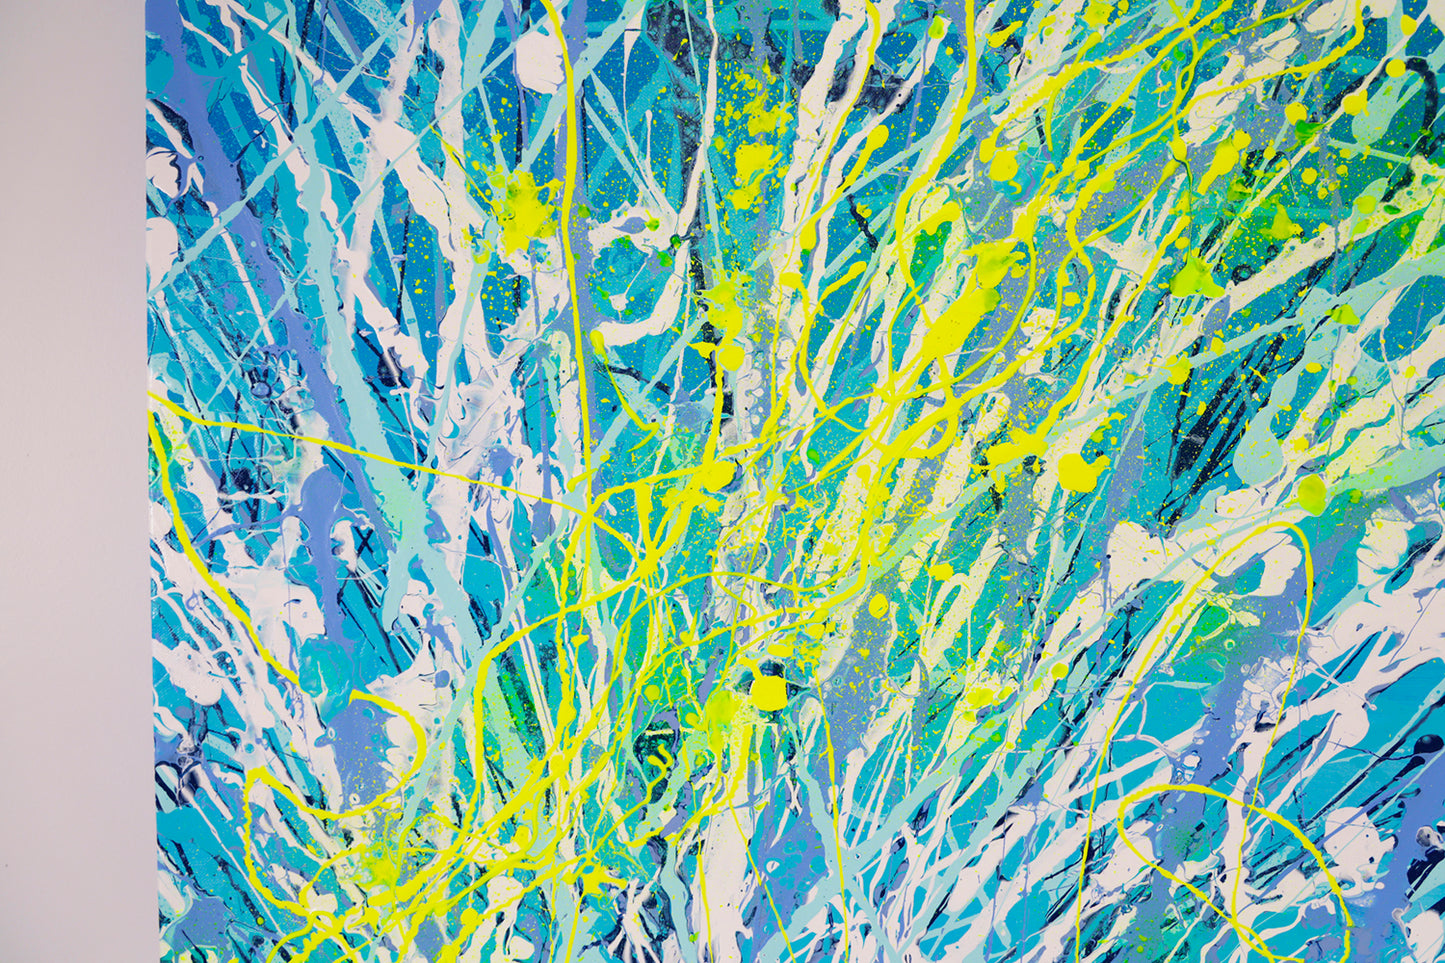 'Luminescence' Original Abstract Painting Closeup. Beautiful blues white and neon yellow represent this bioluminescence inspired artwork. Hand painted on canvas by Bridget Bradley, Abstract Expressionist Artist, Australia